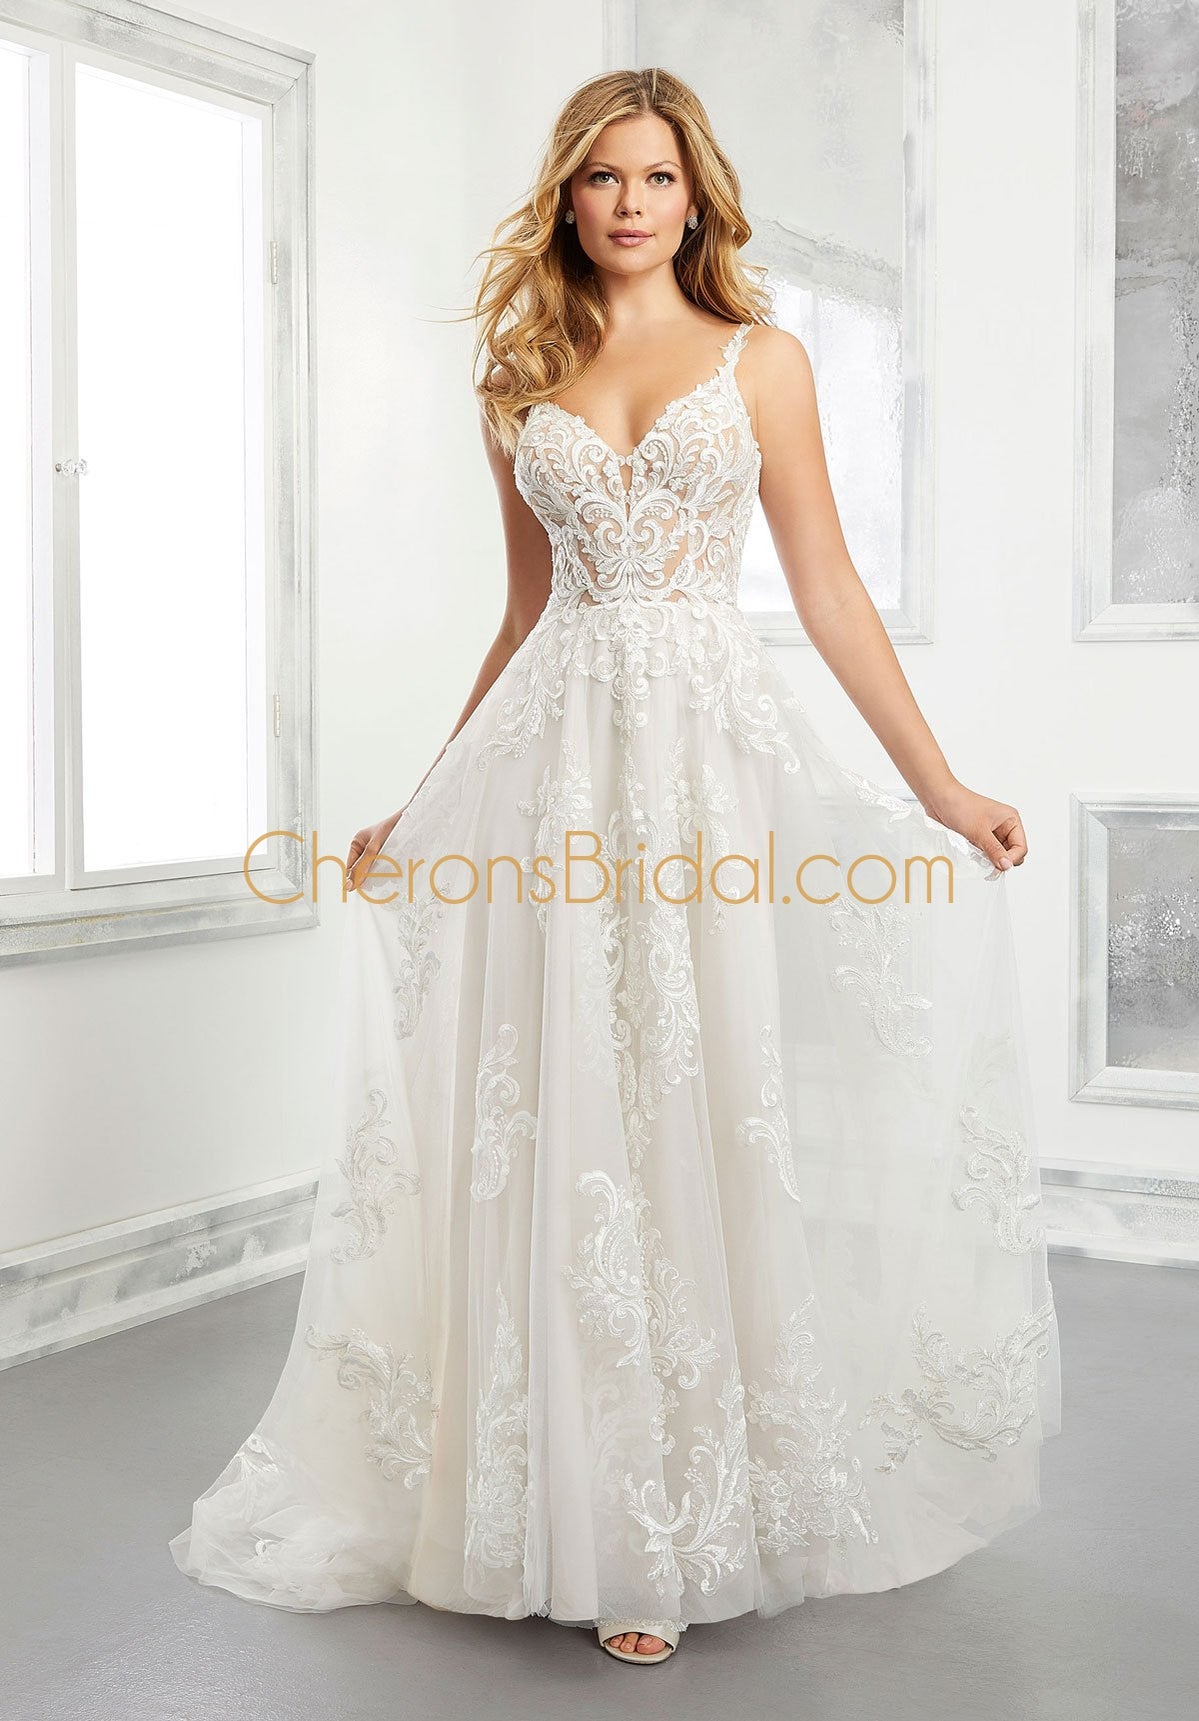 Morilee - 2309 - Brenda - Cheron's Bridal, Wedding Gown - Morilee Line - - Wedding Gowns Dresses Chattanooga Hixson Shops Boutiques Tennessee TN Georgia GA MSRP Lowest Prices Sale Discount